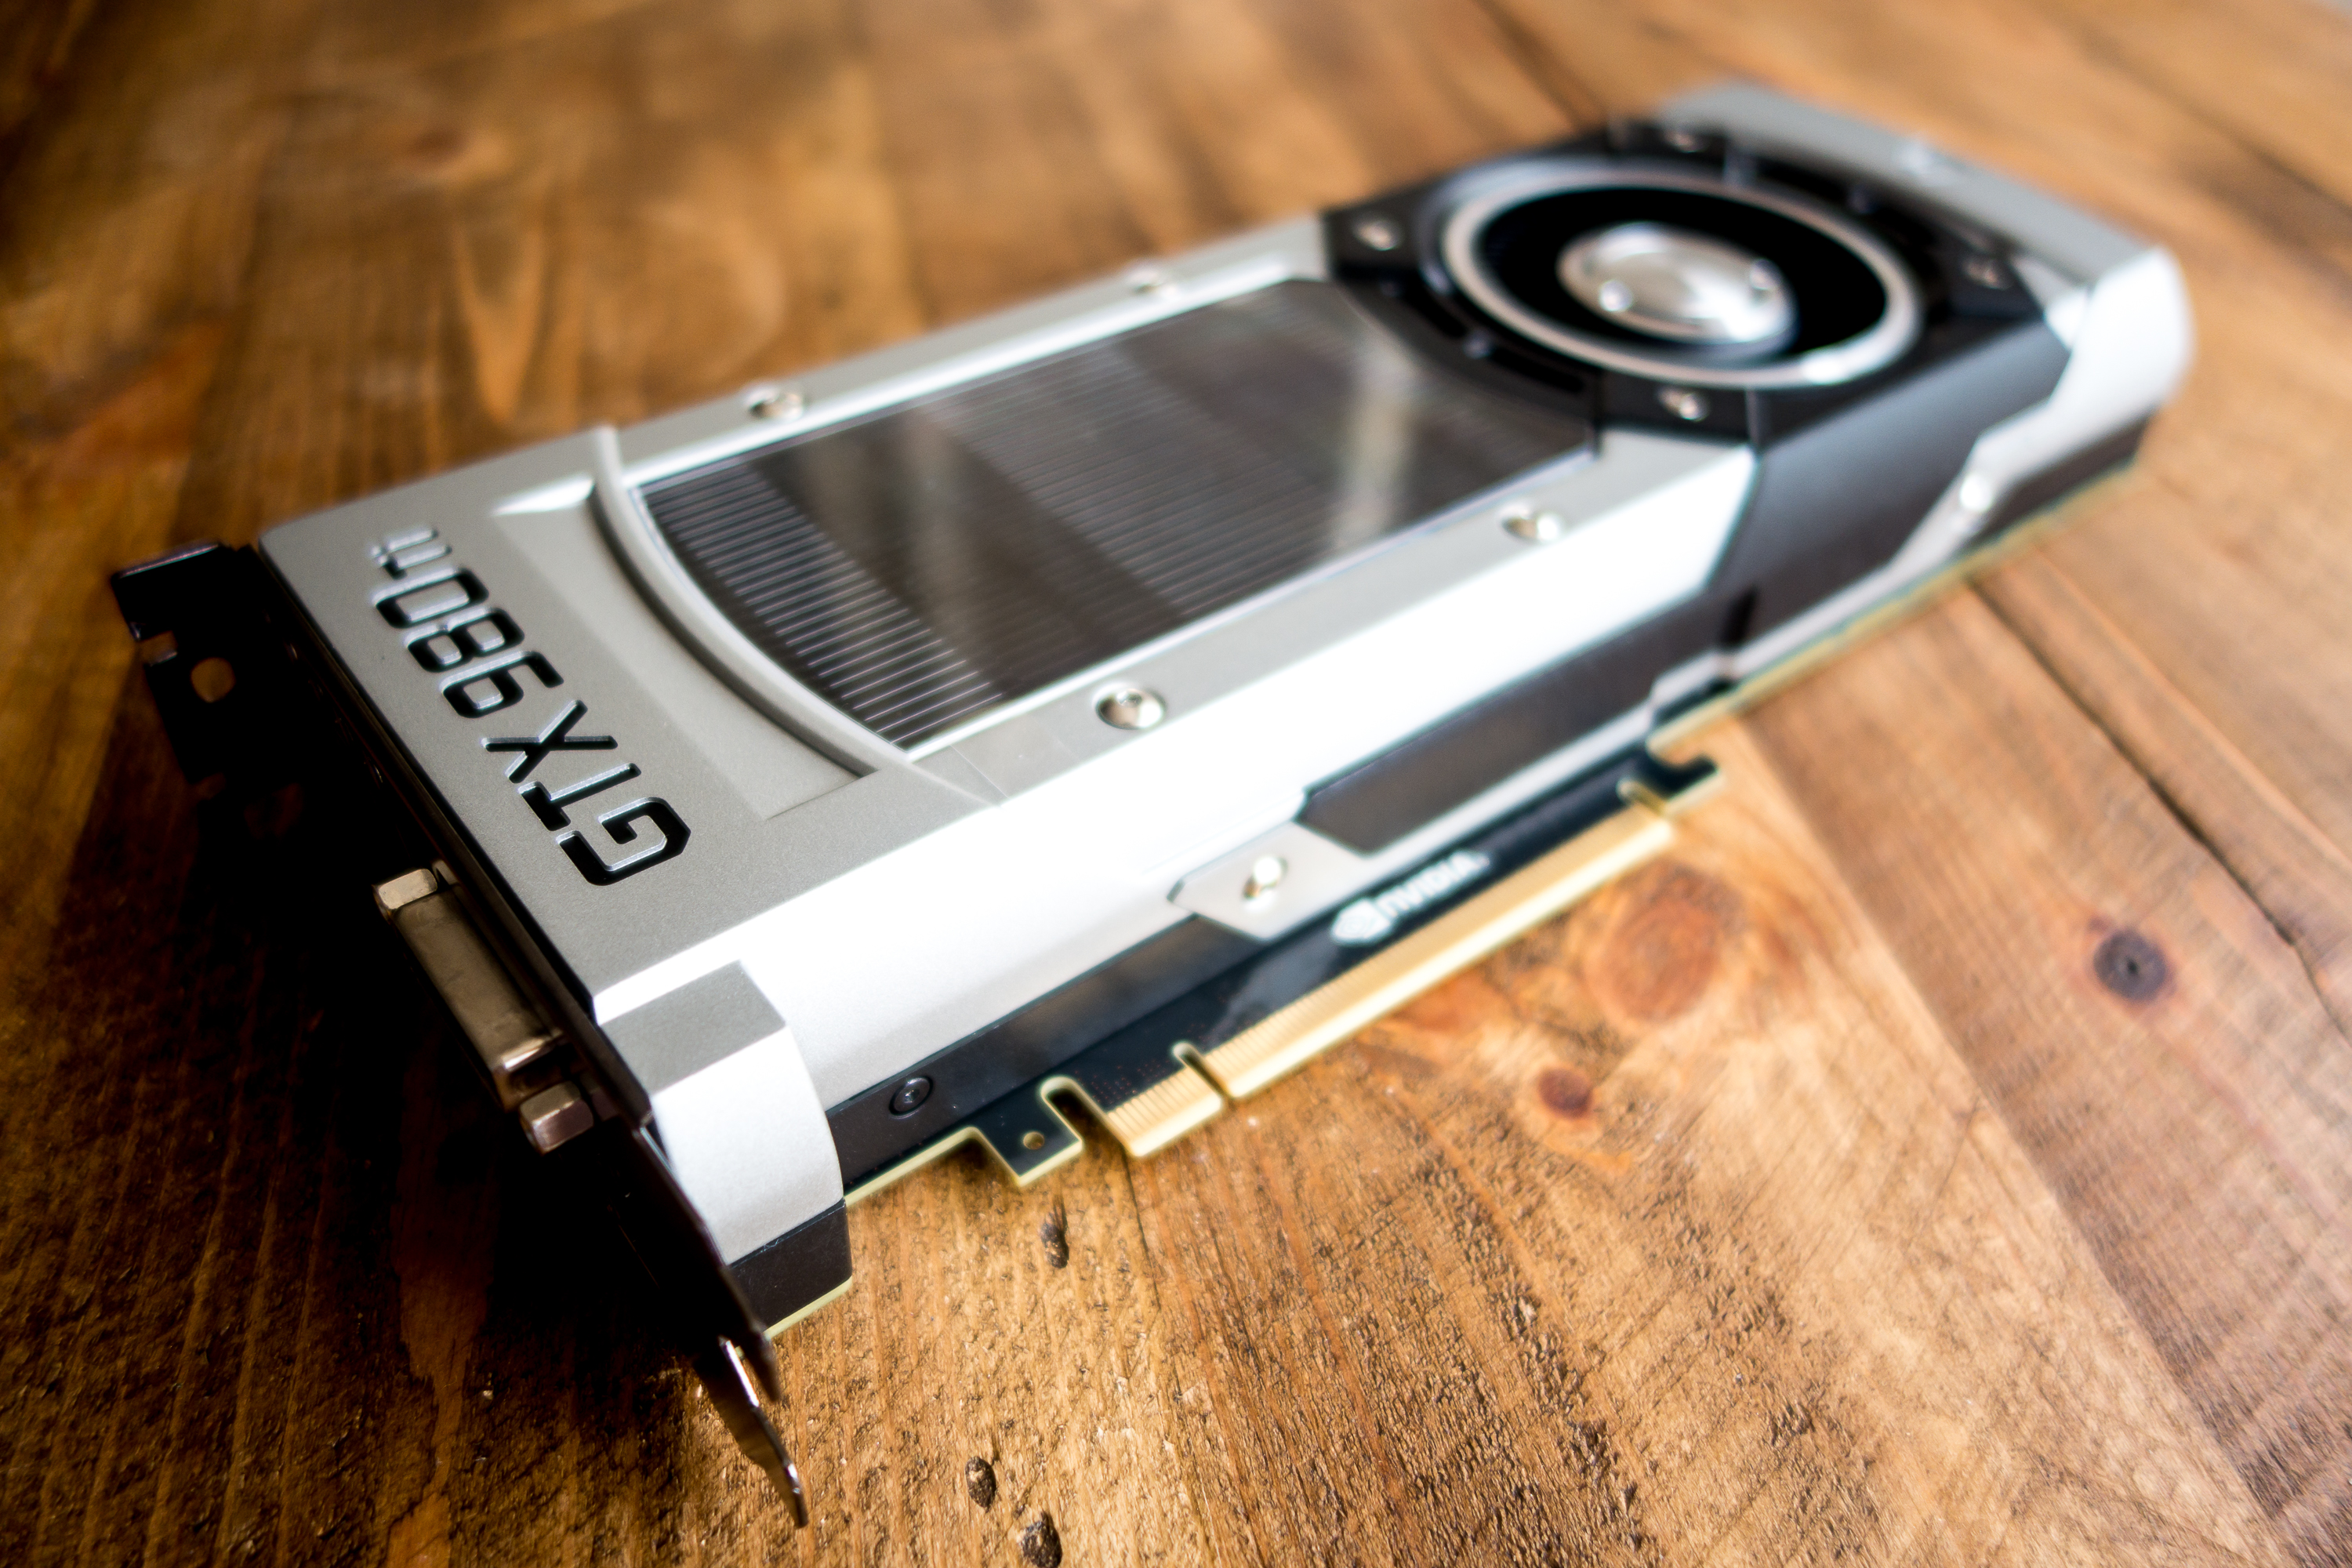 Nvidia GTX 980 Ti review: All the power of the Titan X for $650